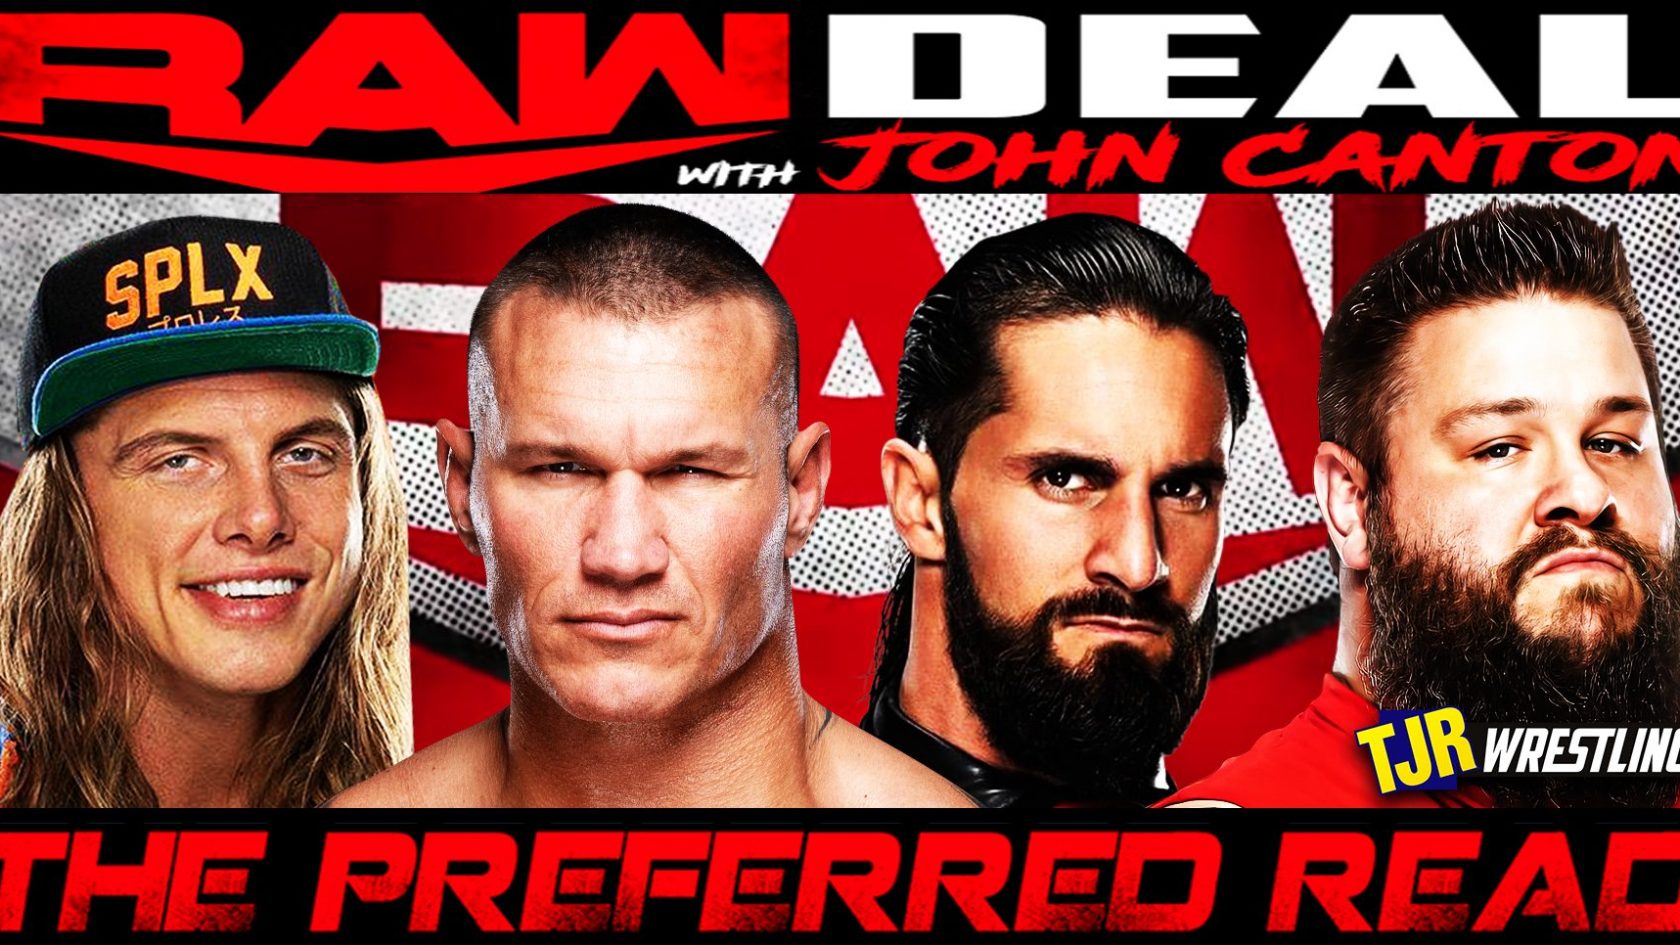 The John Report The WWE Raw Deal 04 17 17 Review TJR Wrestling